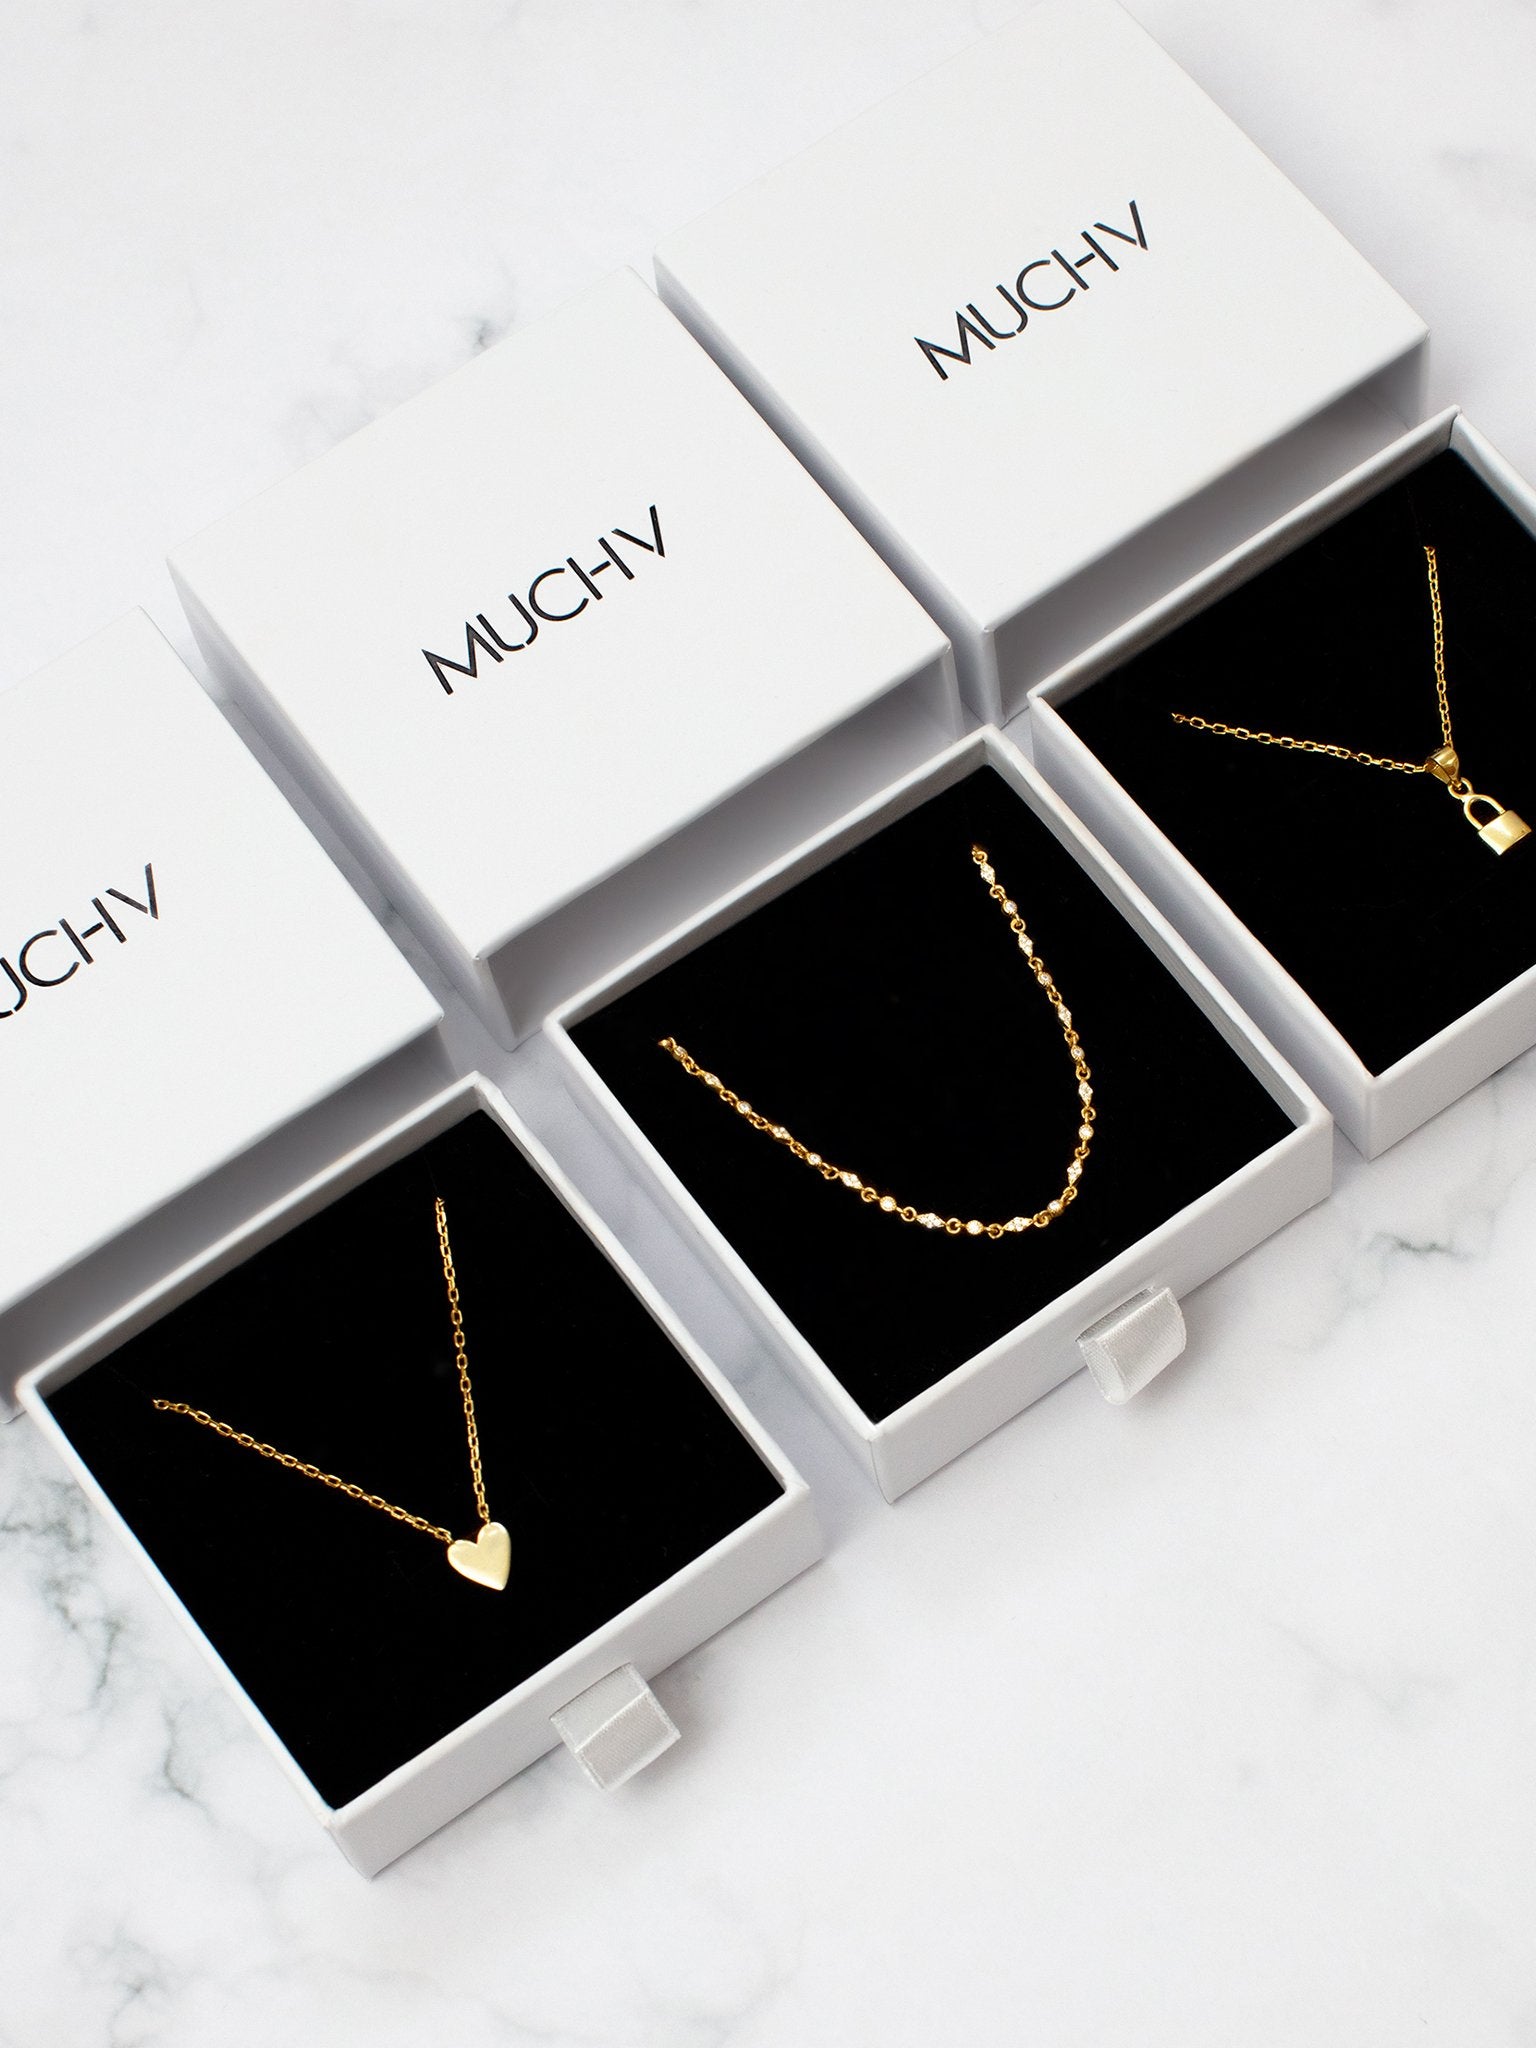 Gold pendant necklaces for women in white gift boxes.